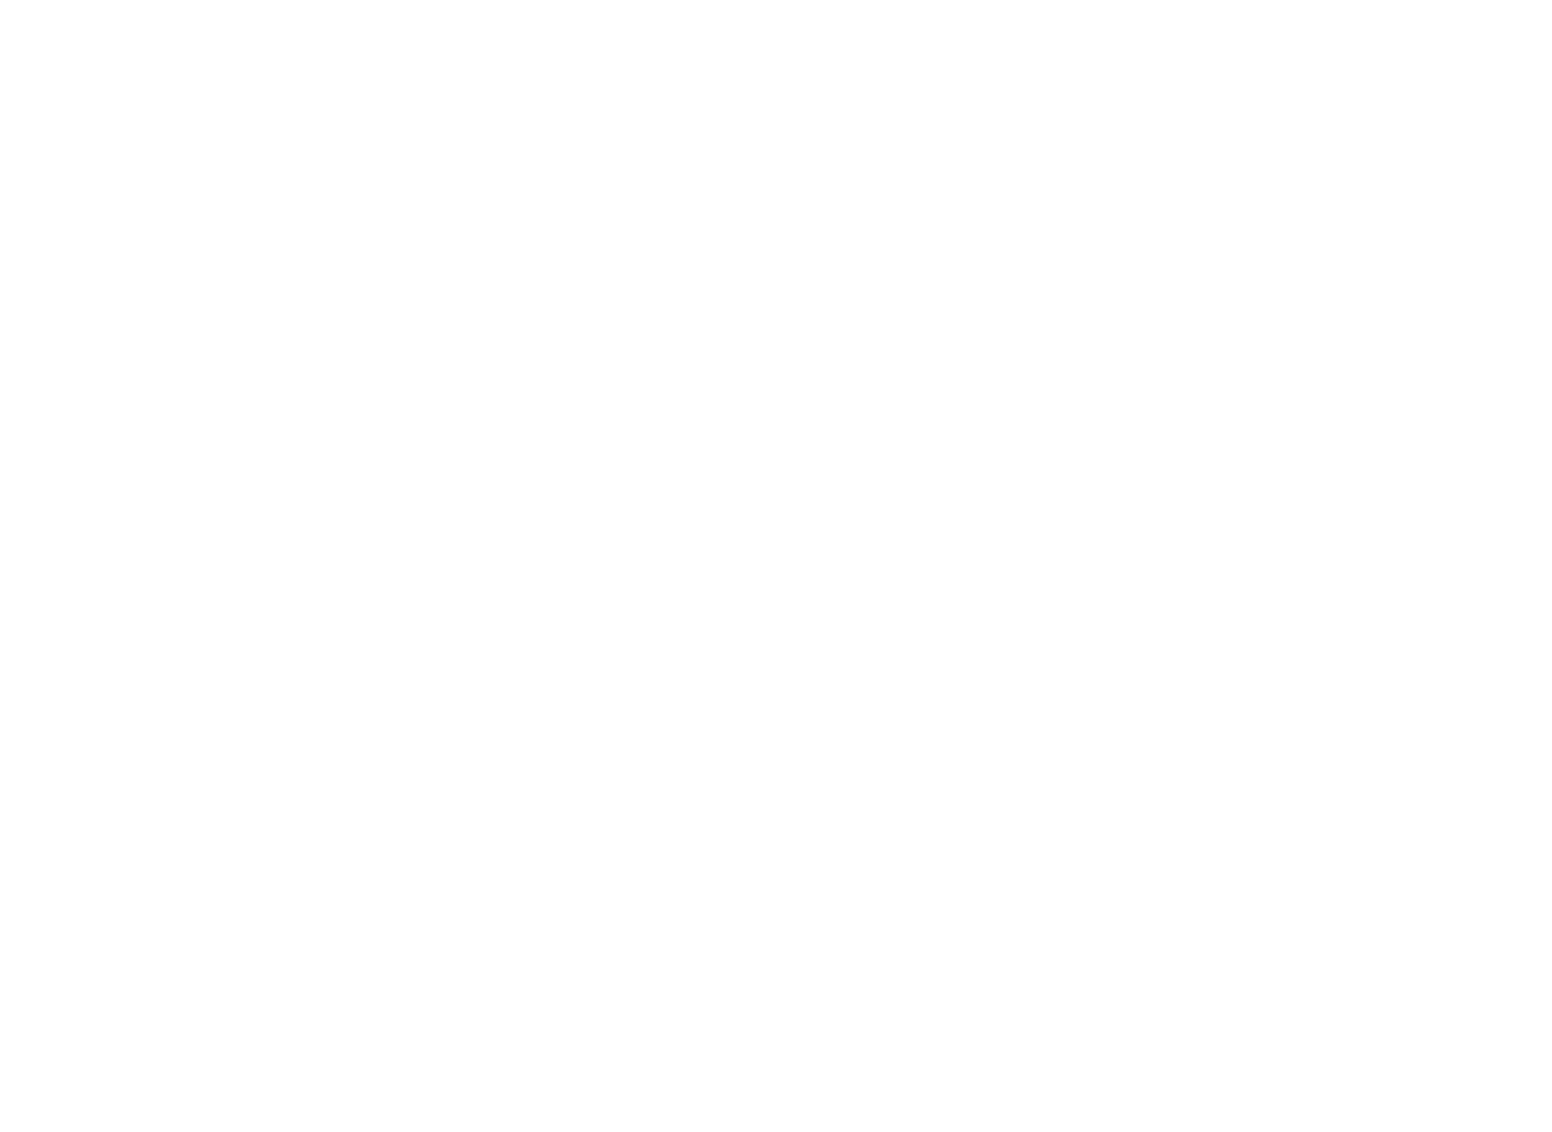 logo of the inn between - end of life care for the homeless